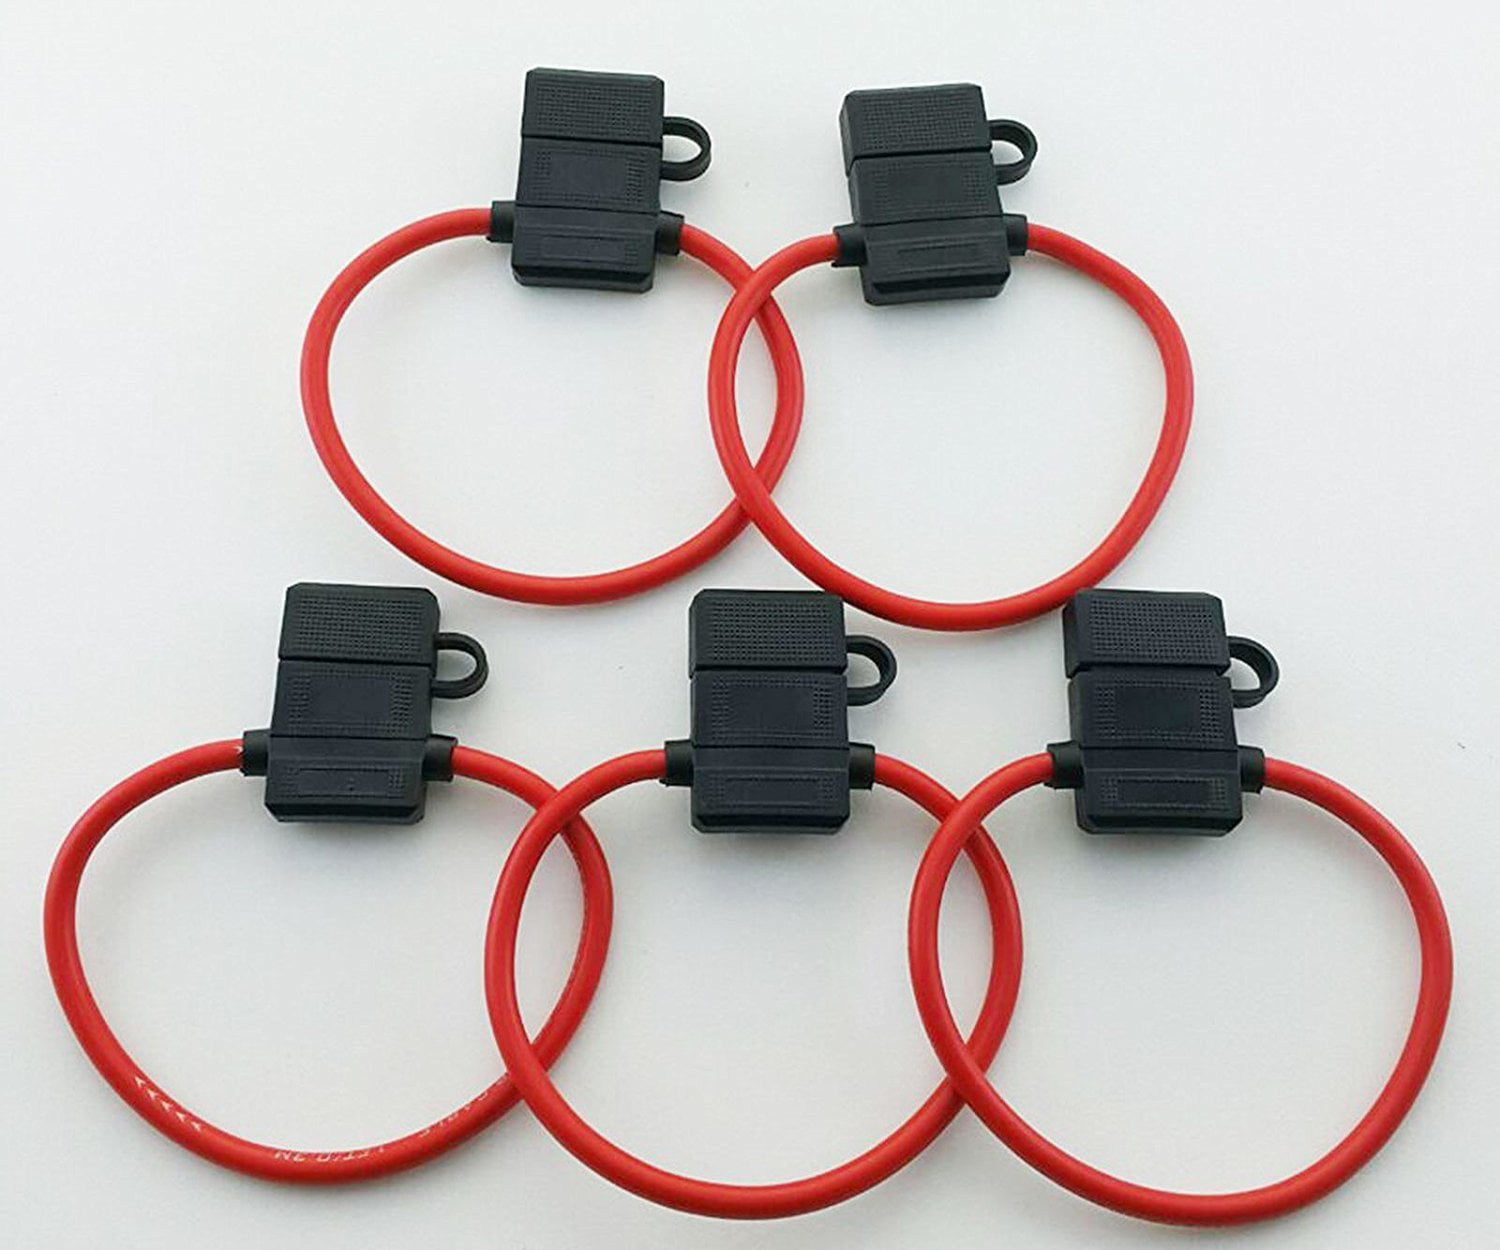 10 PACK 18 GAUGE ATC FUSE HOLDER IN-LINE AWG WIRE COPPER 12 VOLT WITH COVER 